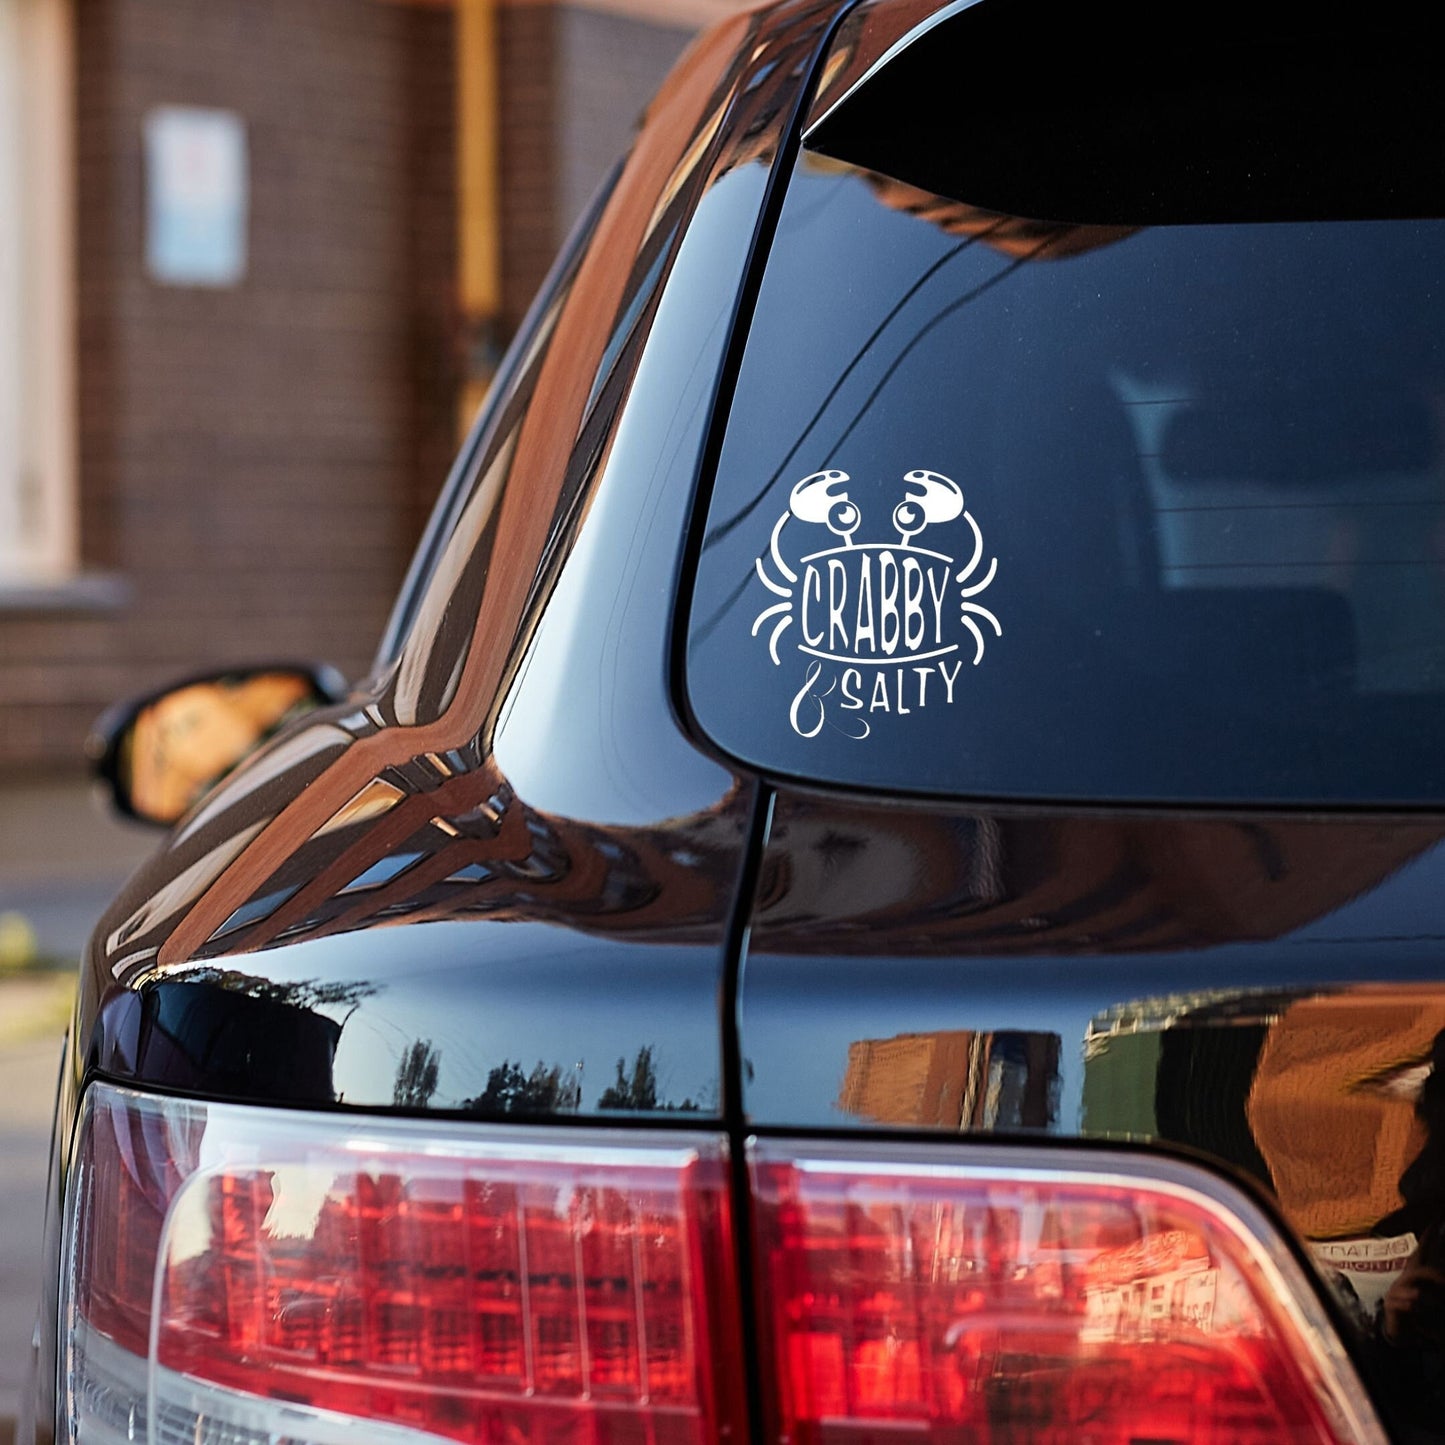 Decal Crabby and Salty Die Cut Vinyl Decal